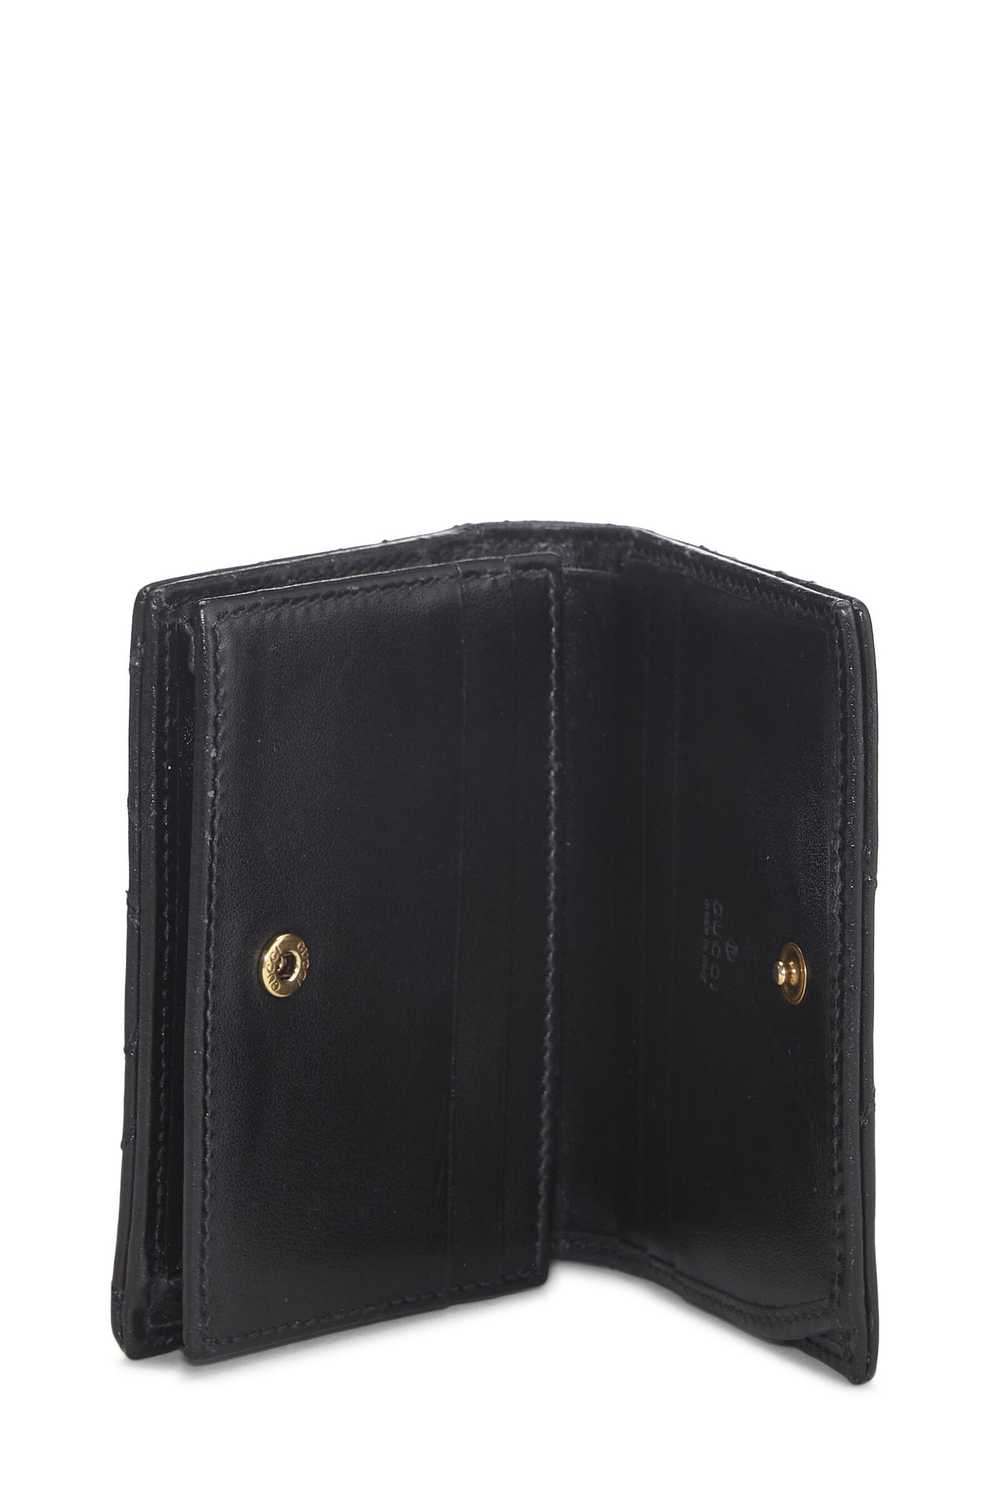 Black Leather GG Marmont Card Case - image 4